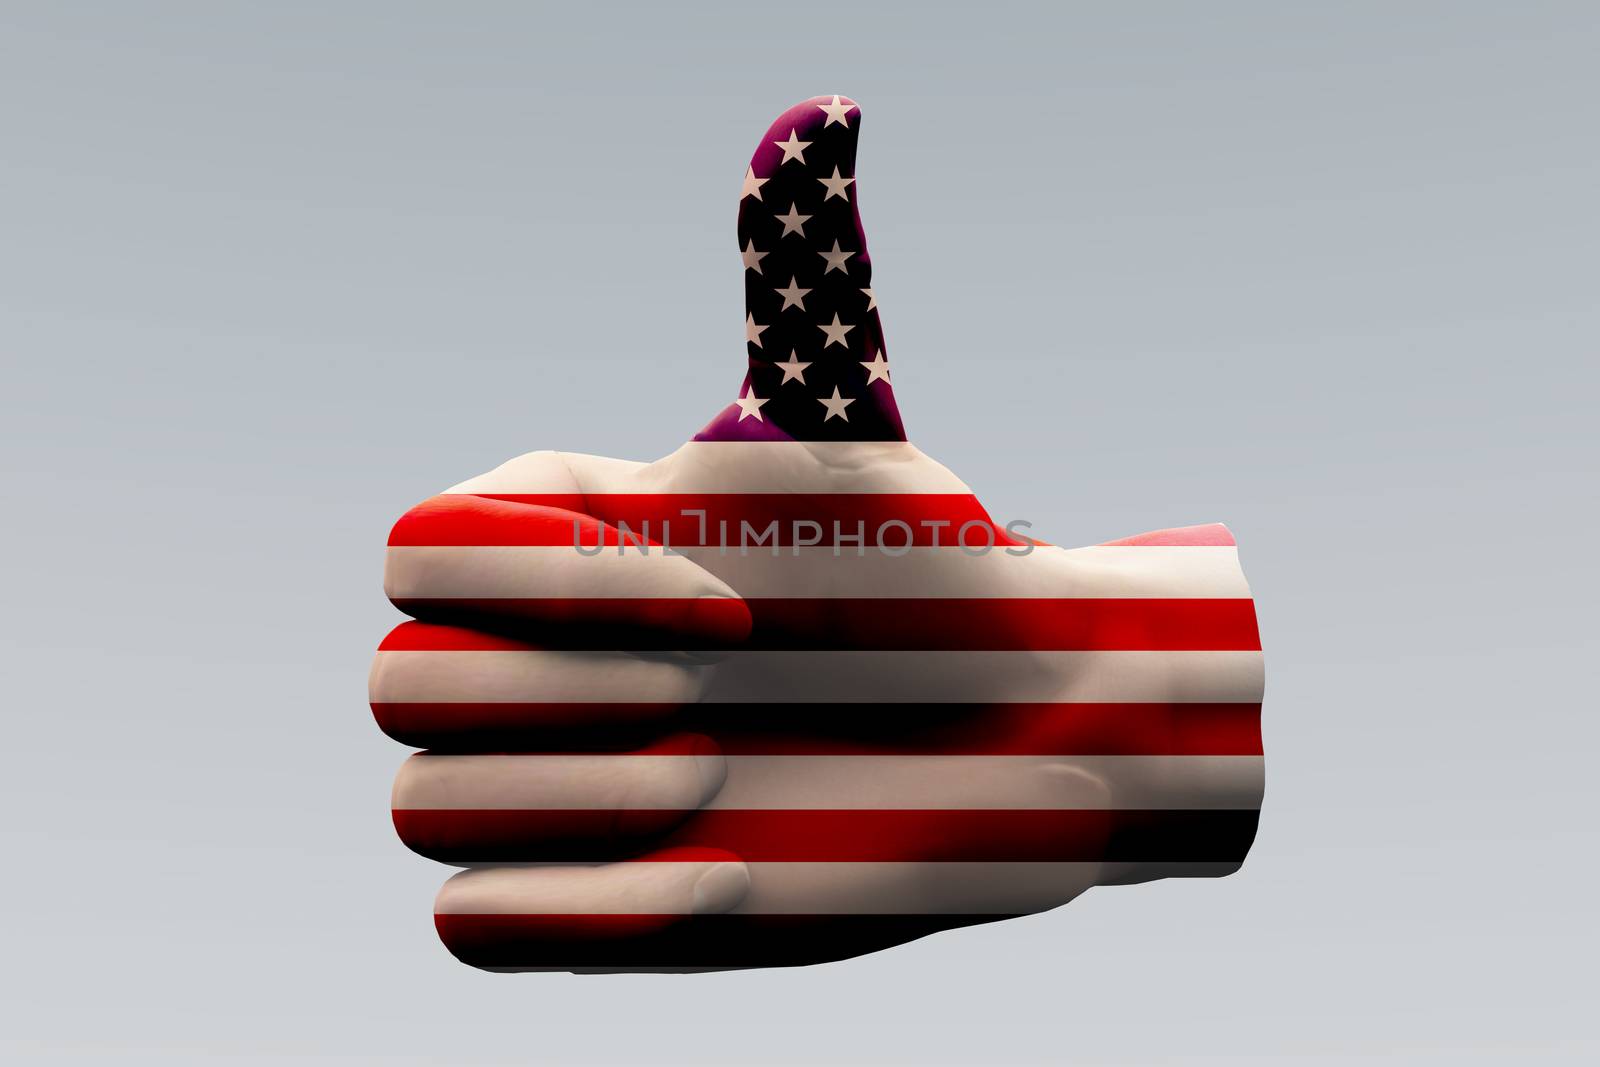 USA Thumbs Up. 3D rendering